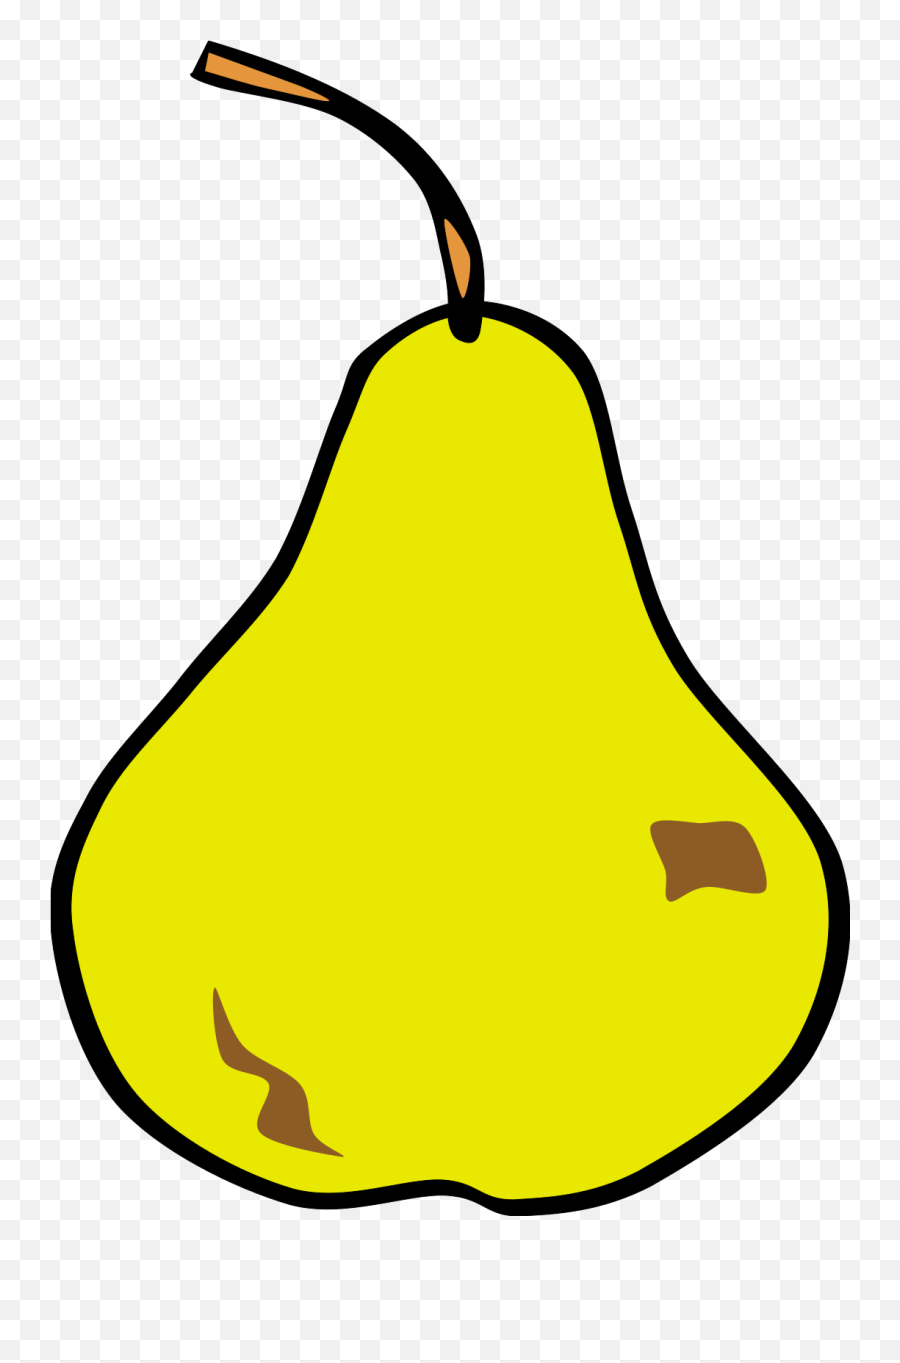 Cartoon Pear - Outline Fruit Clipart Black And White Emoji,Prickly Pear Emoticon Meaning